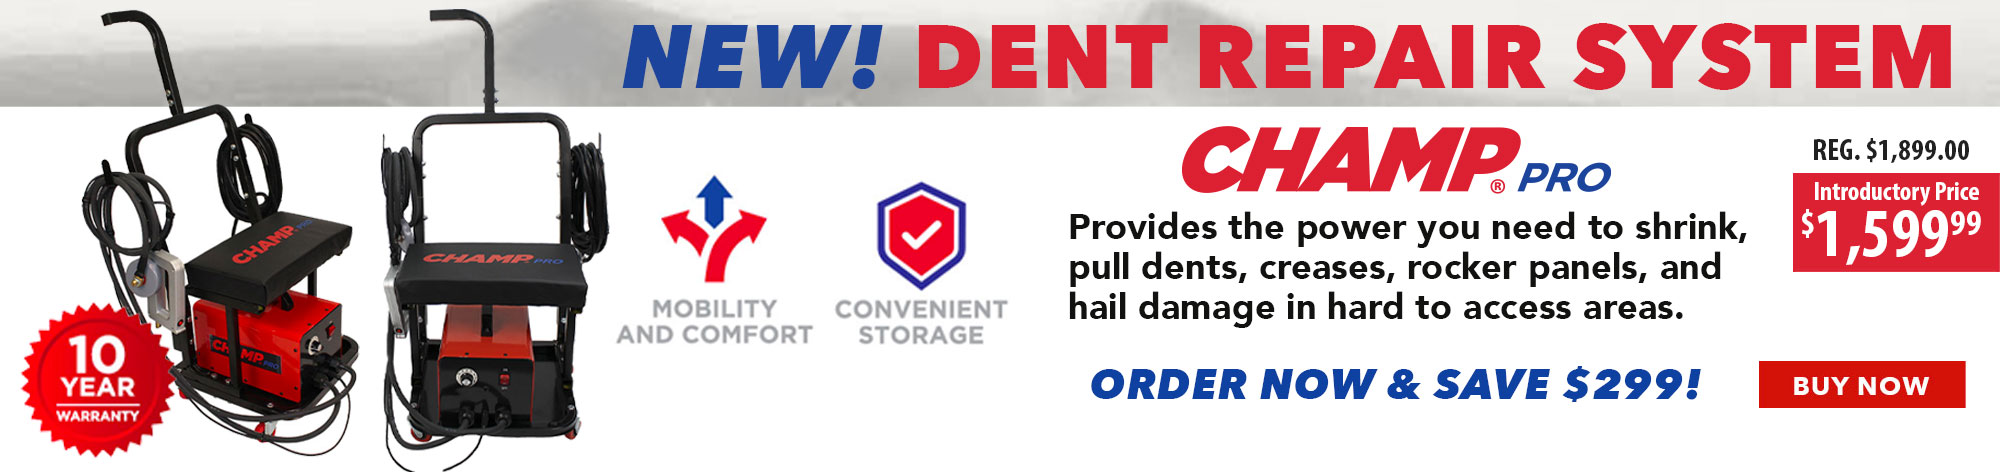 New! Champ Pro Dent Repair System